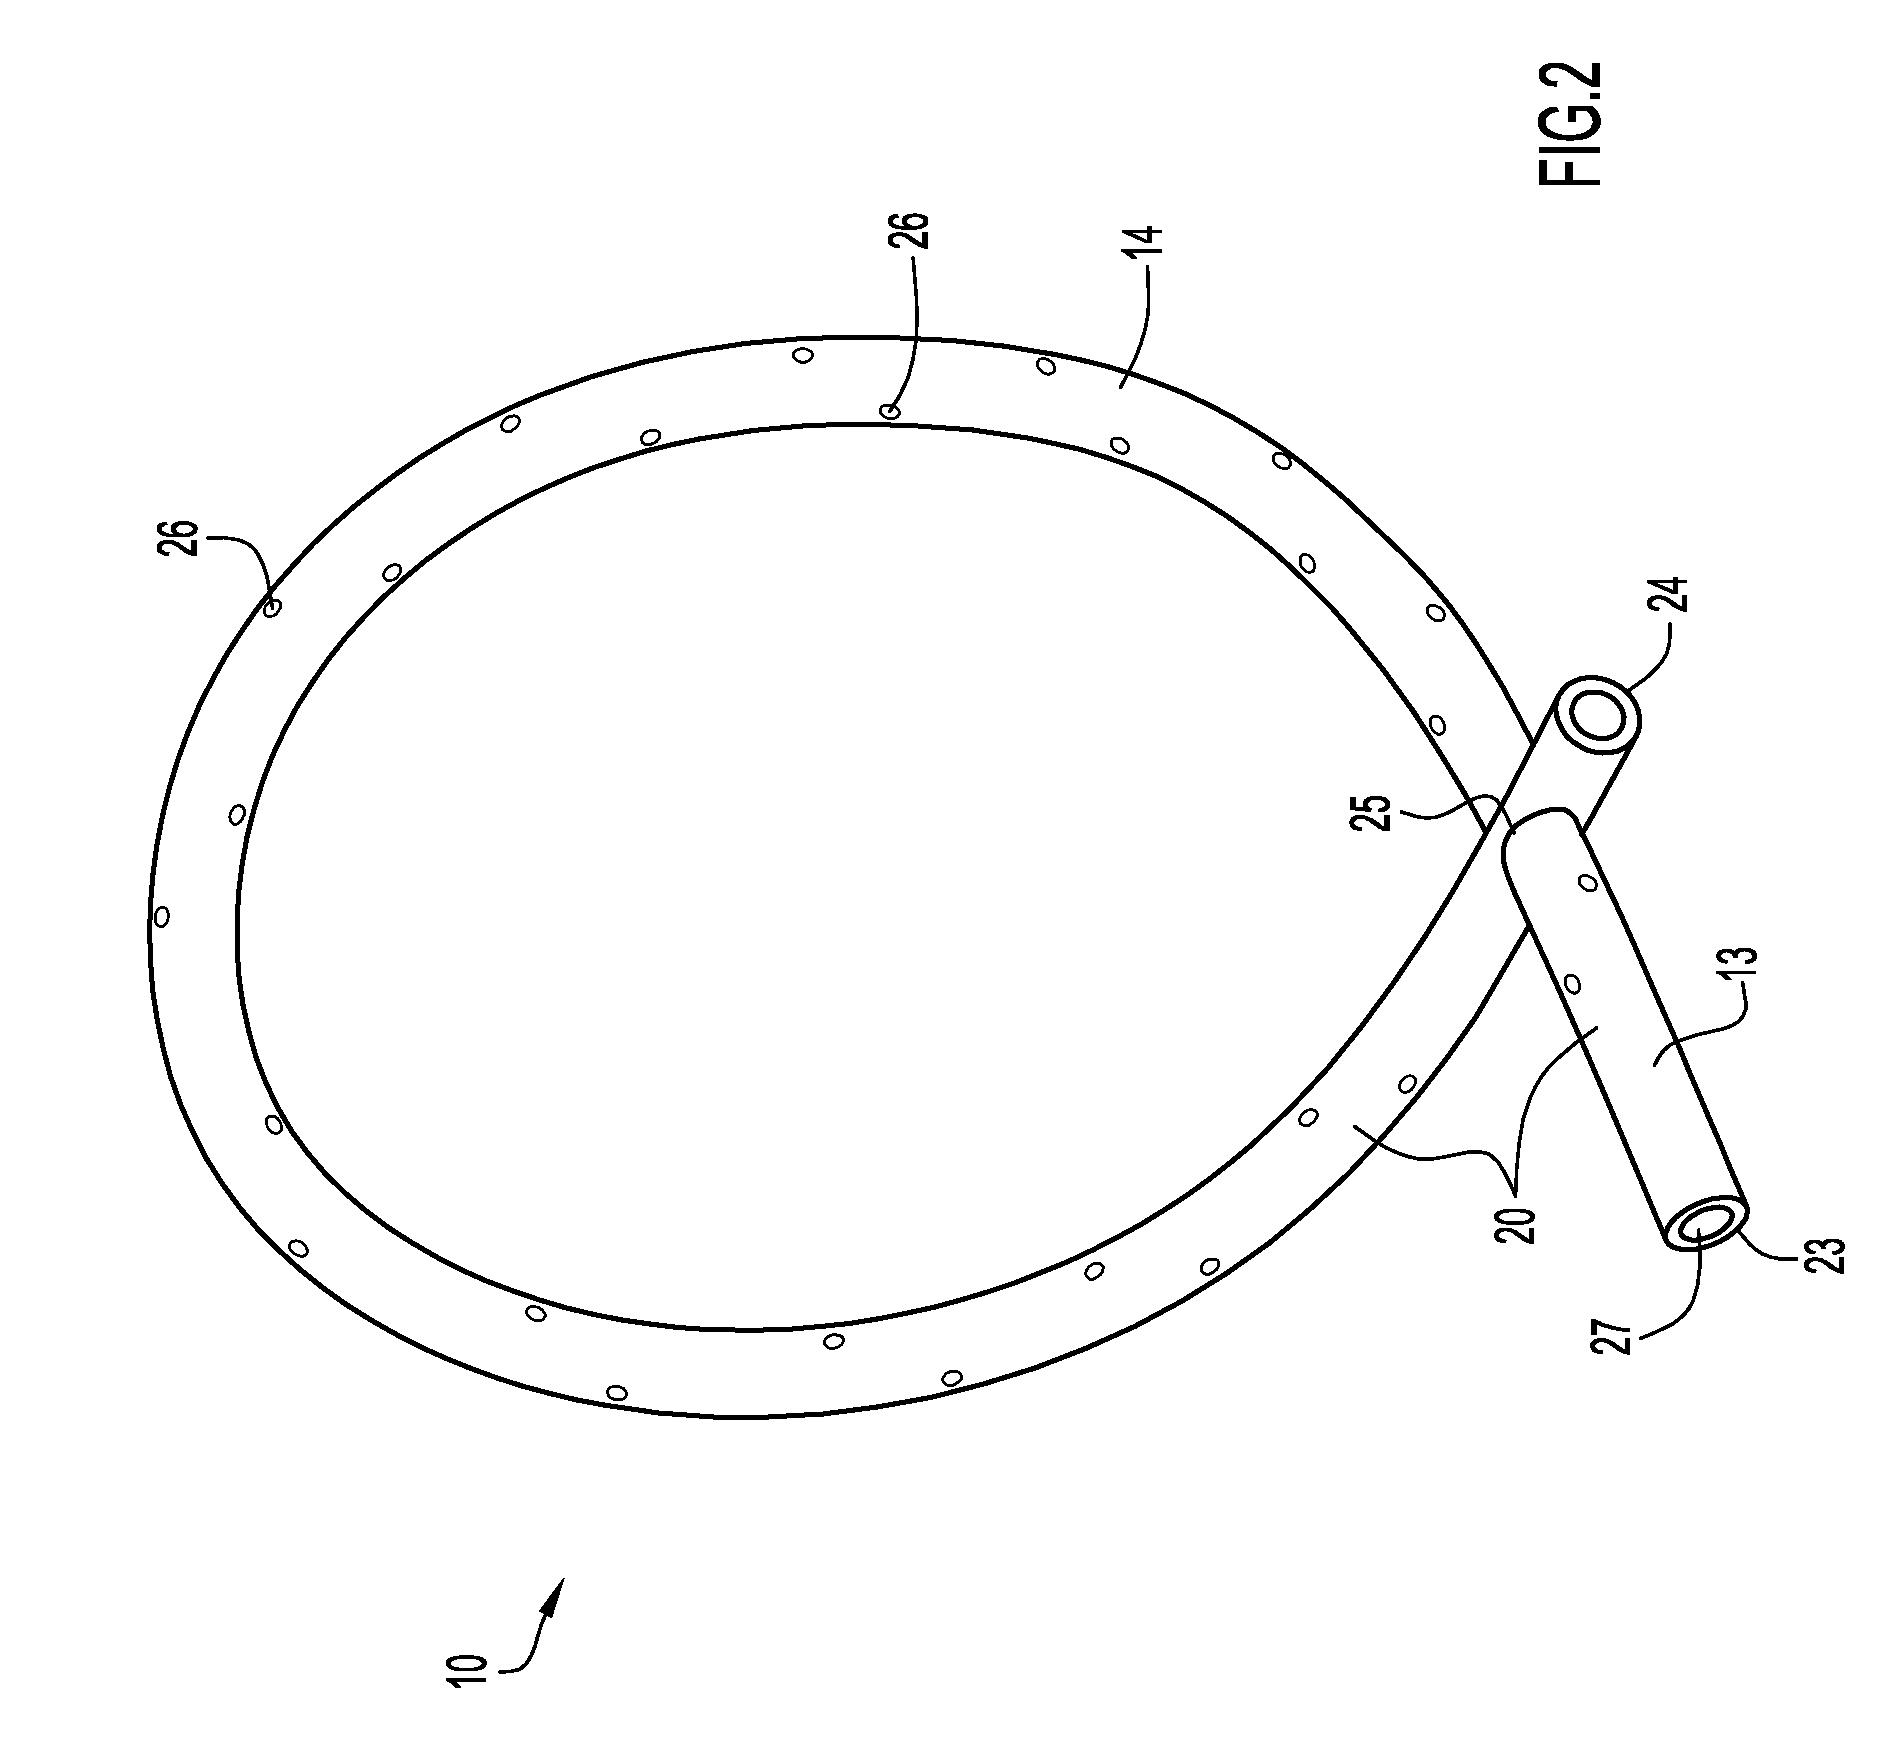 Dental Appliance and Method for Removing Bodily and Other Fluids From a Dental Site